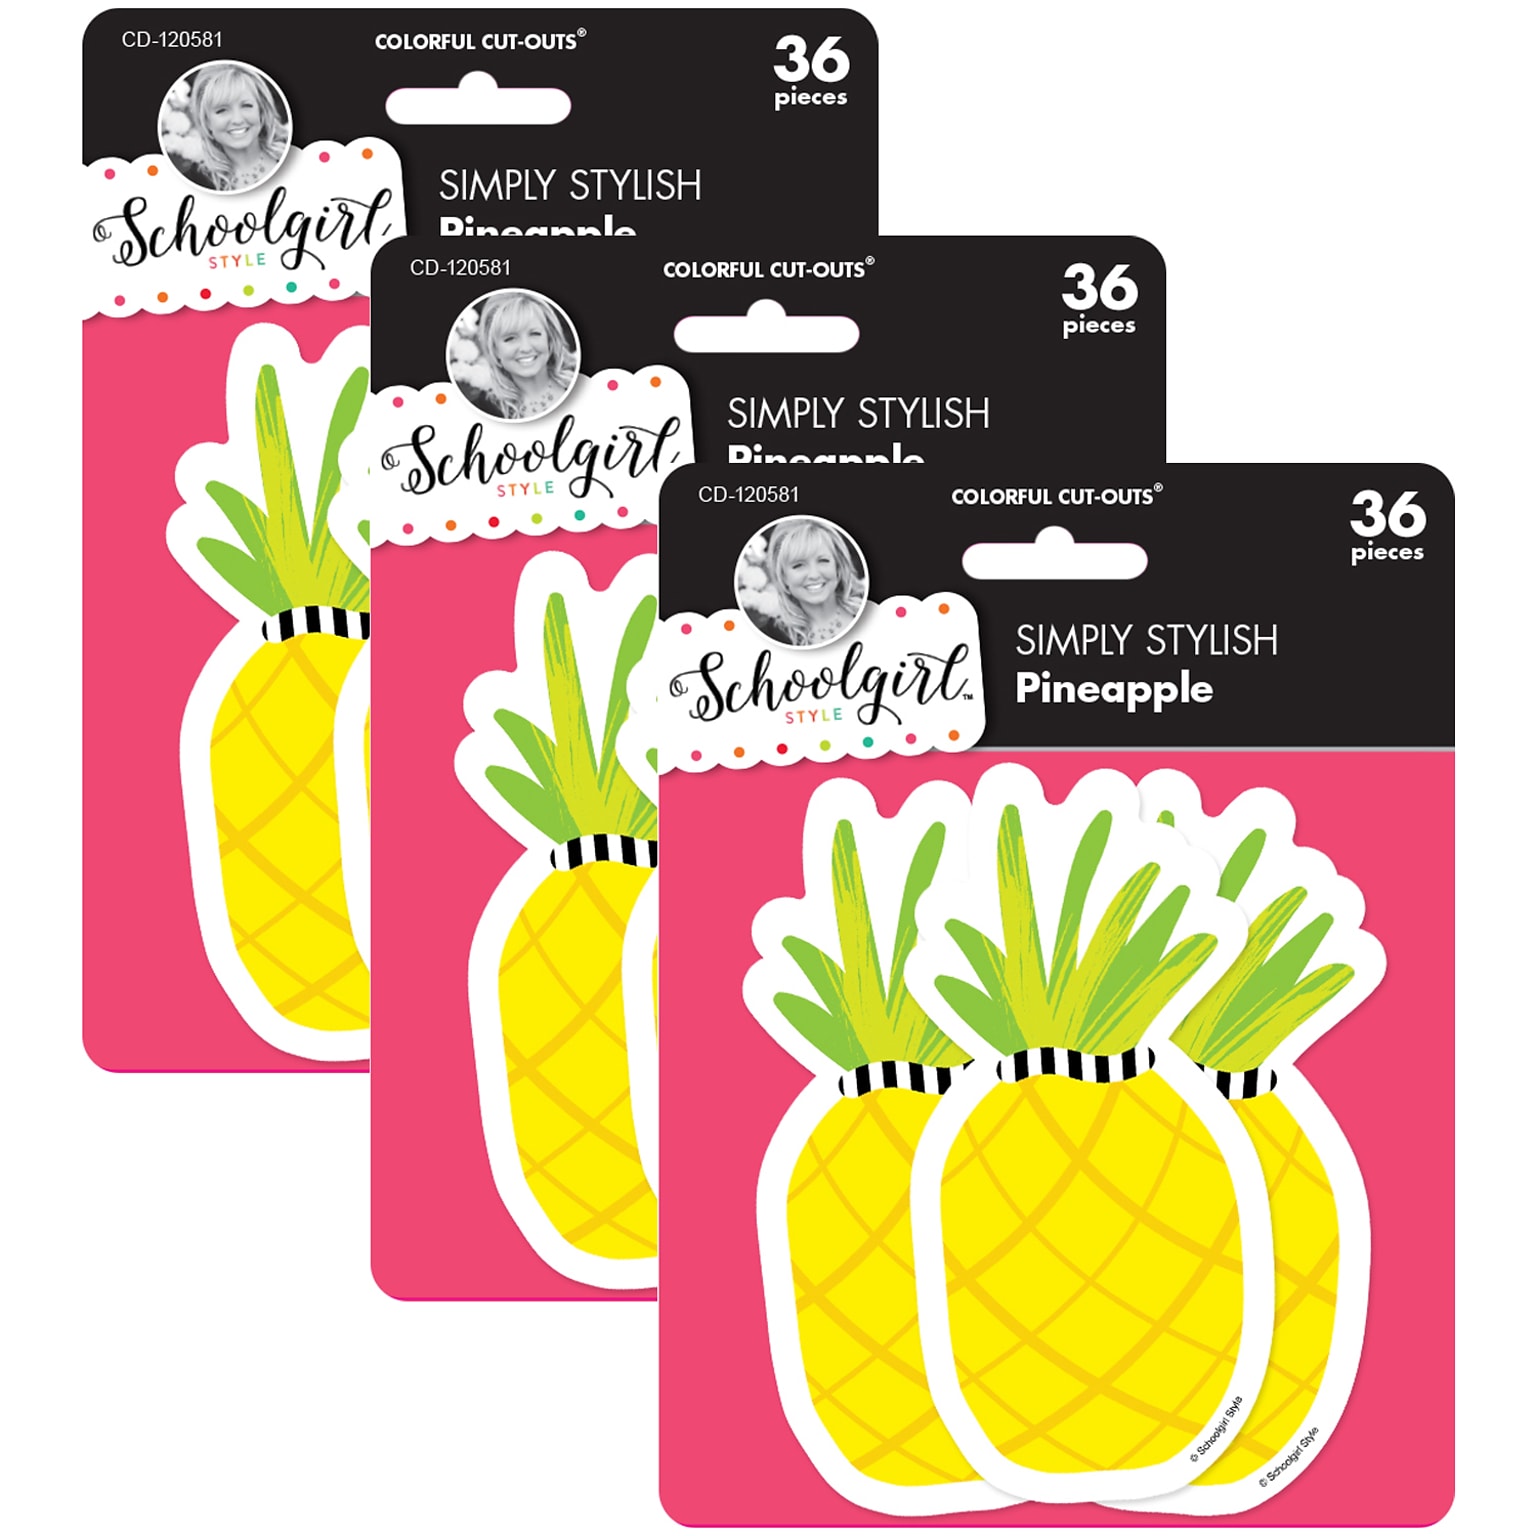 Schoolgirl Style™ Simply Stylish Tropical Pineapple Cut-Outs, 36 Per Pack, 3 Packs (CD-120581-3)